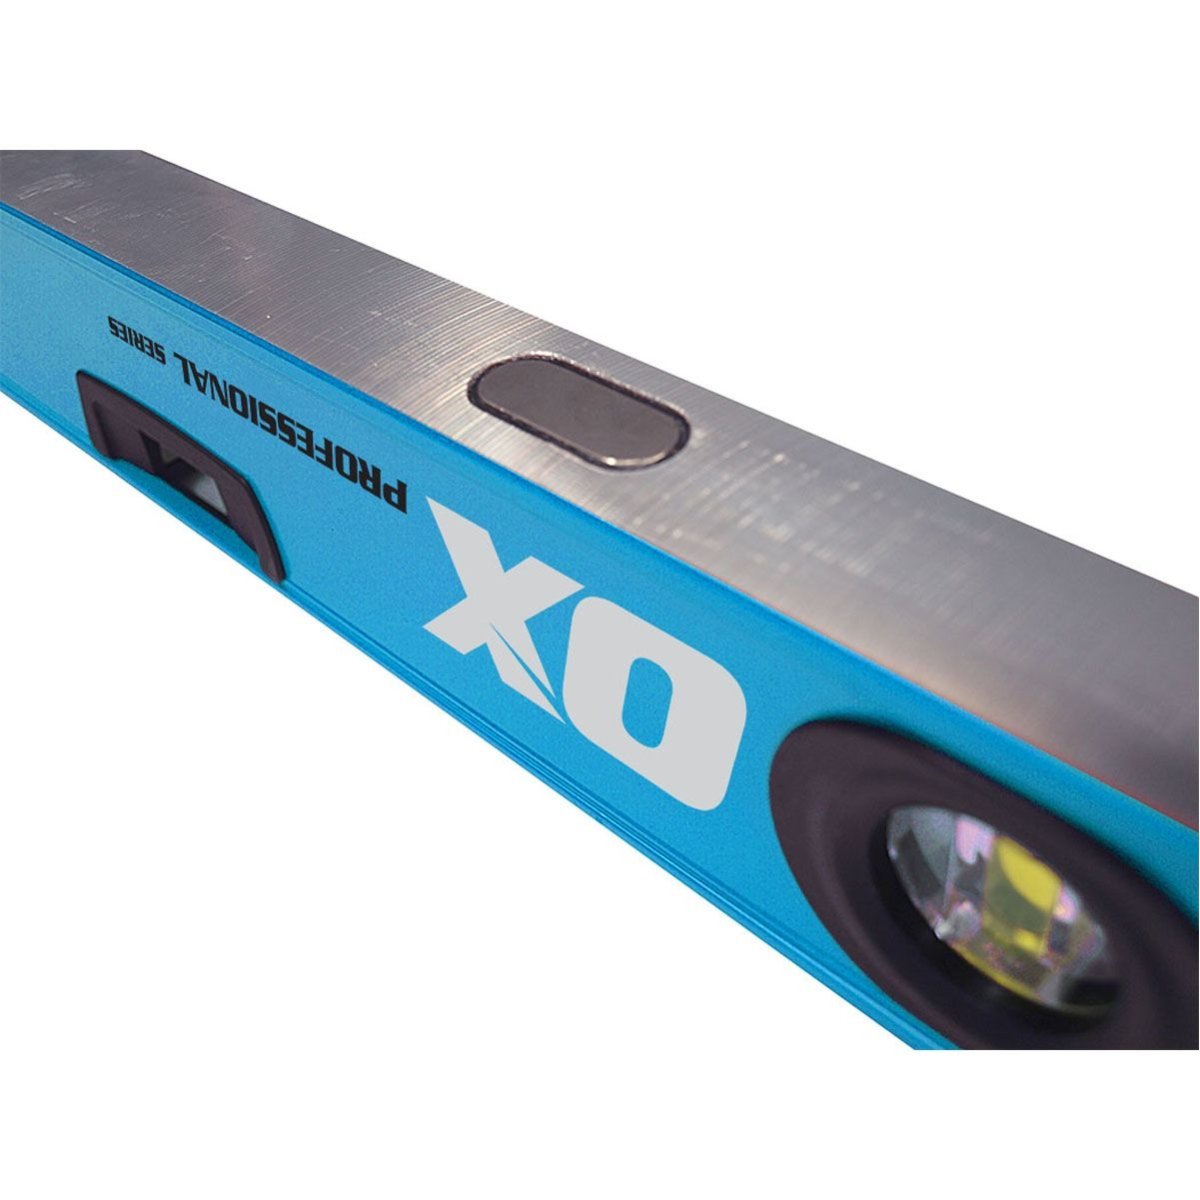 Ox Pro Series Level - Non Magnetic - Ox Tools